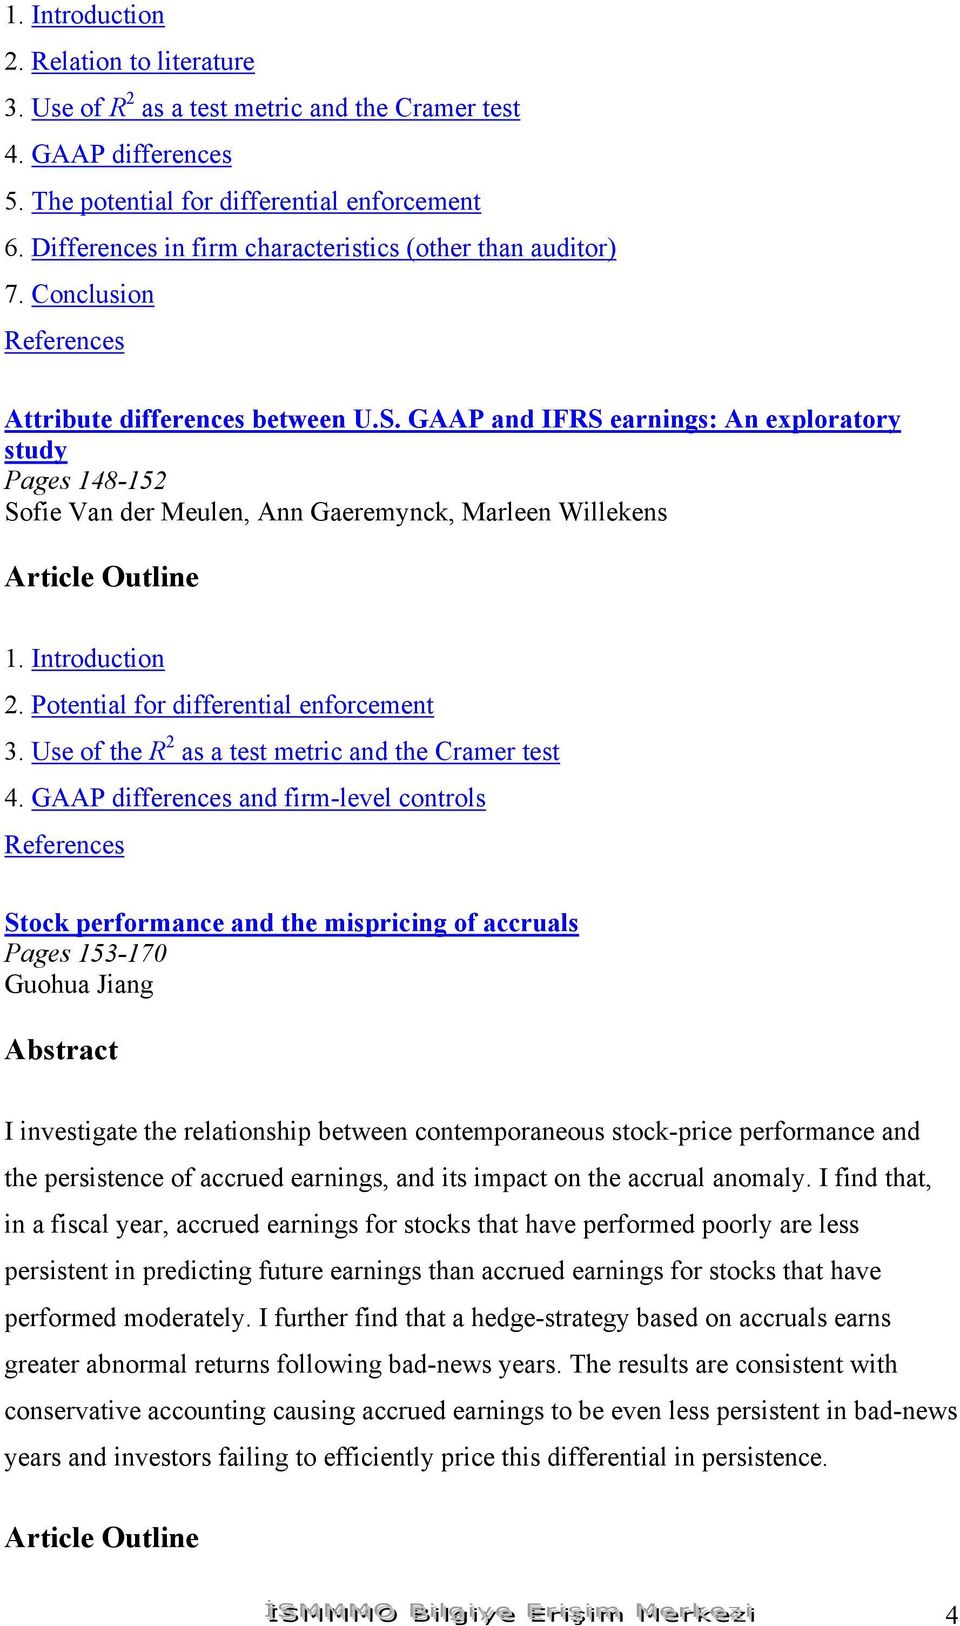 GAAP and IFRS earnings: An exploratory study Pages 148-152 Sofie Van der Meulen, Ann Gaeremynck, Marleen Willekens 2. Potential for differential enforcement 3.